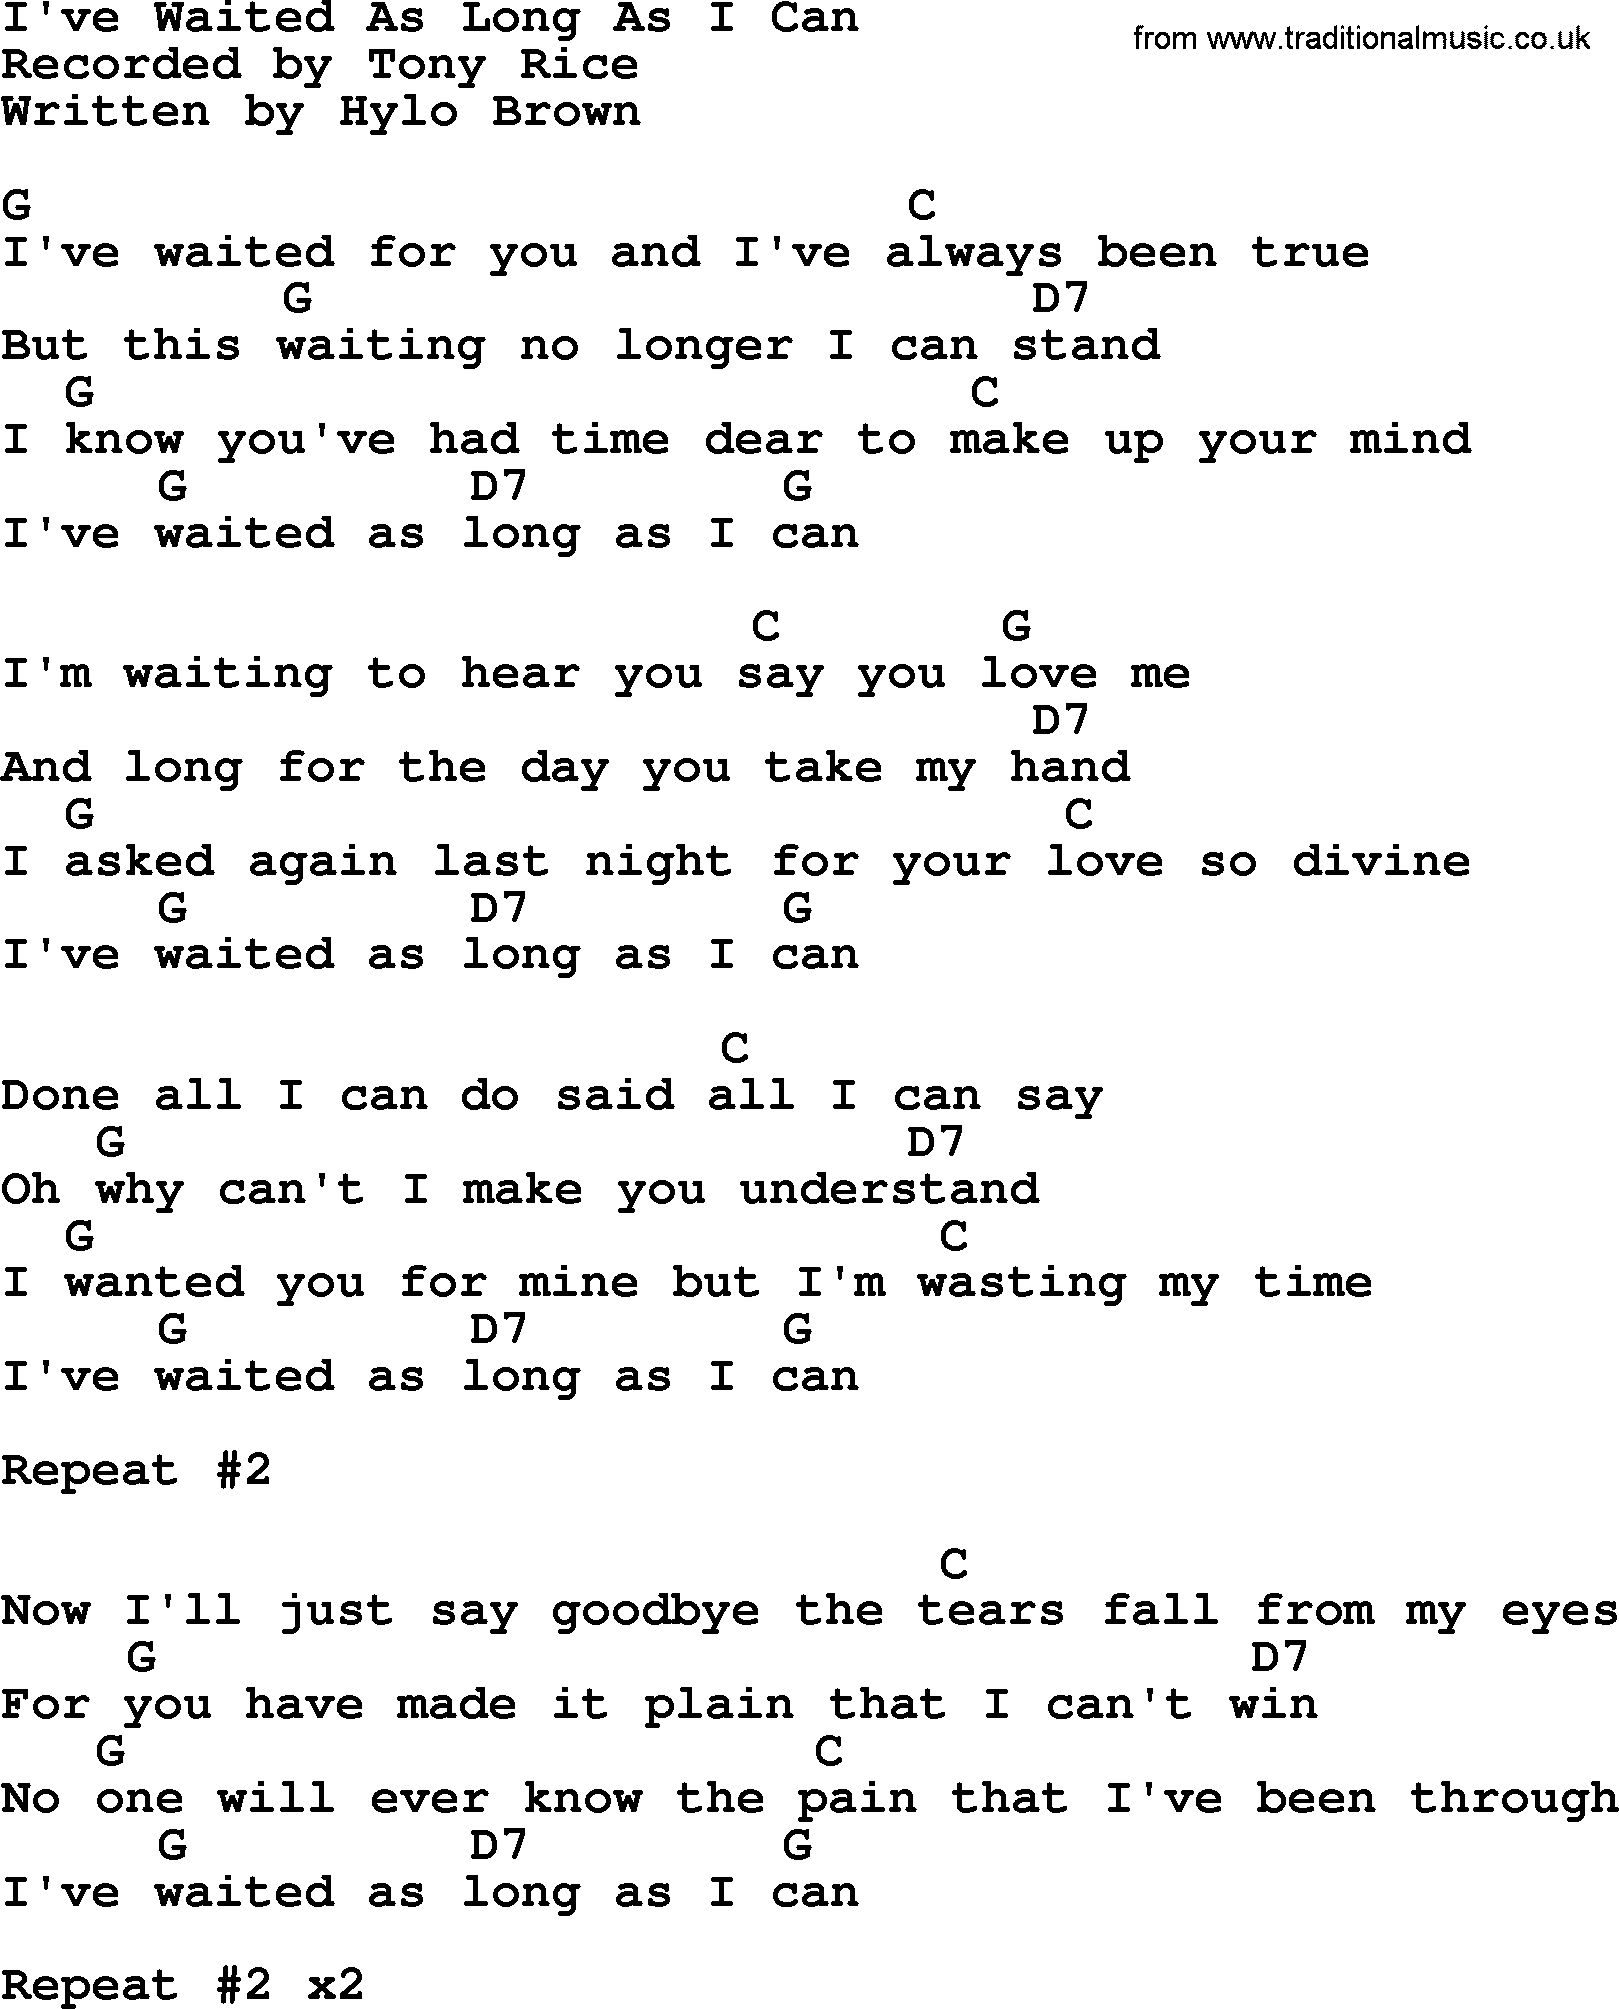 Bluegrass song: I've Waited As Long As I Can, lyrics and chords